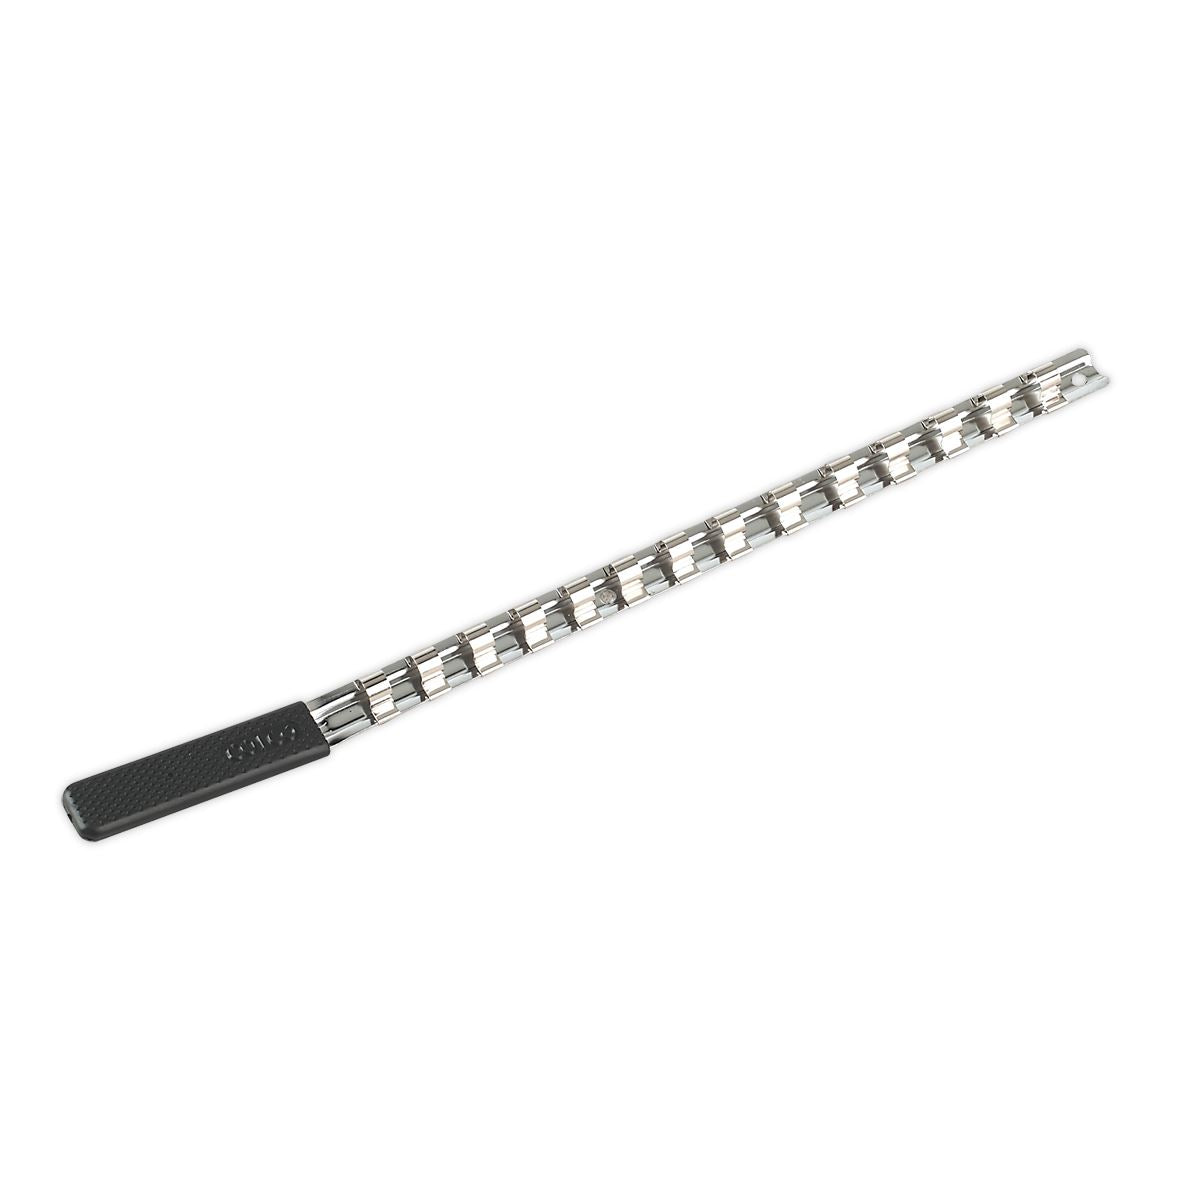 Sealey Premier Socket Retaining Rail with 14 Clips 3/8"Sq Drive